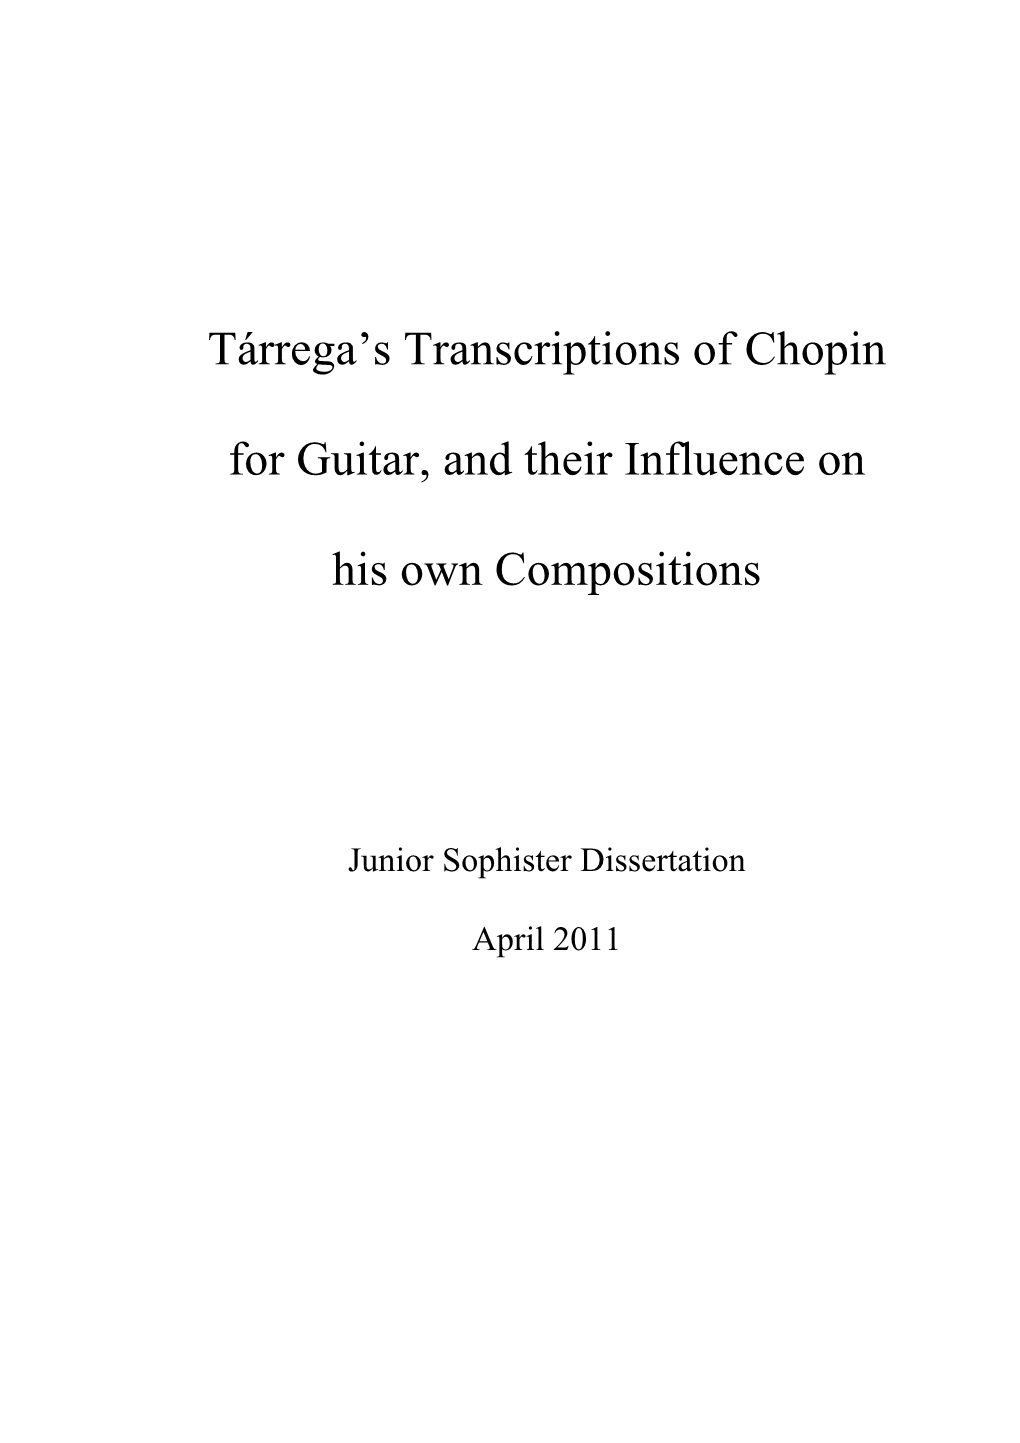 Tárrega's Transcriptions of Chopin for Guitar, and Their Influence on His